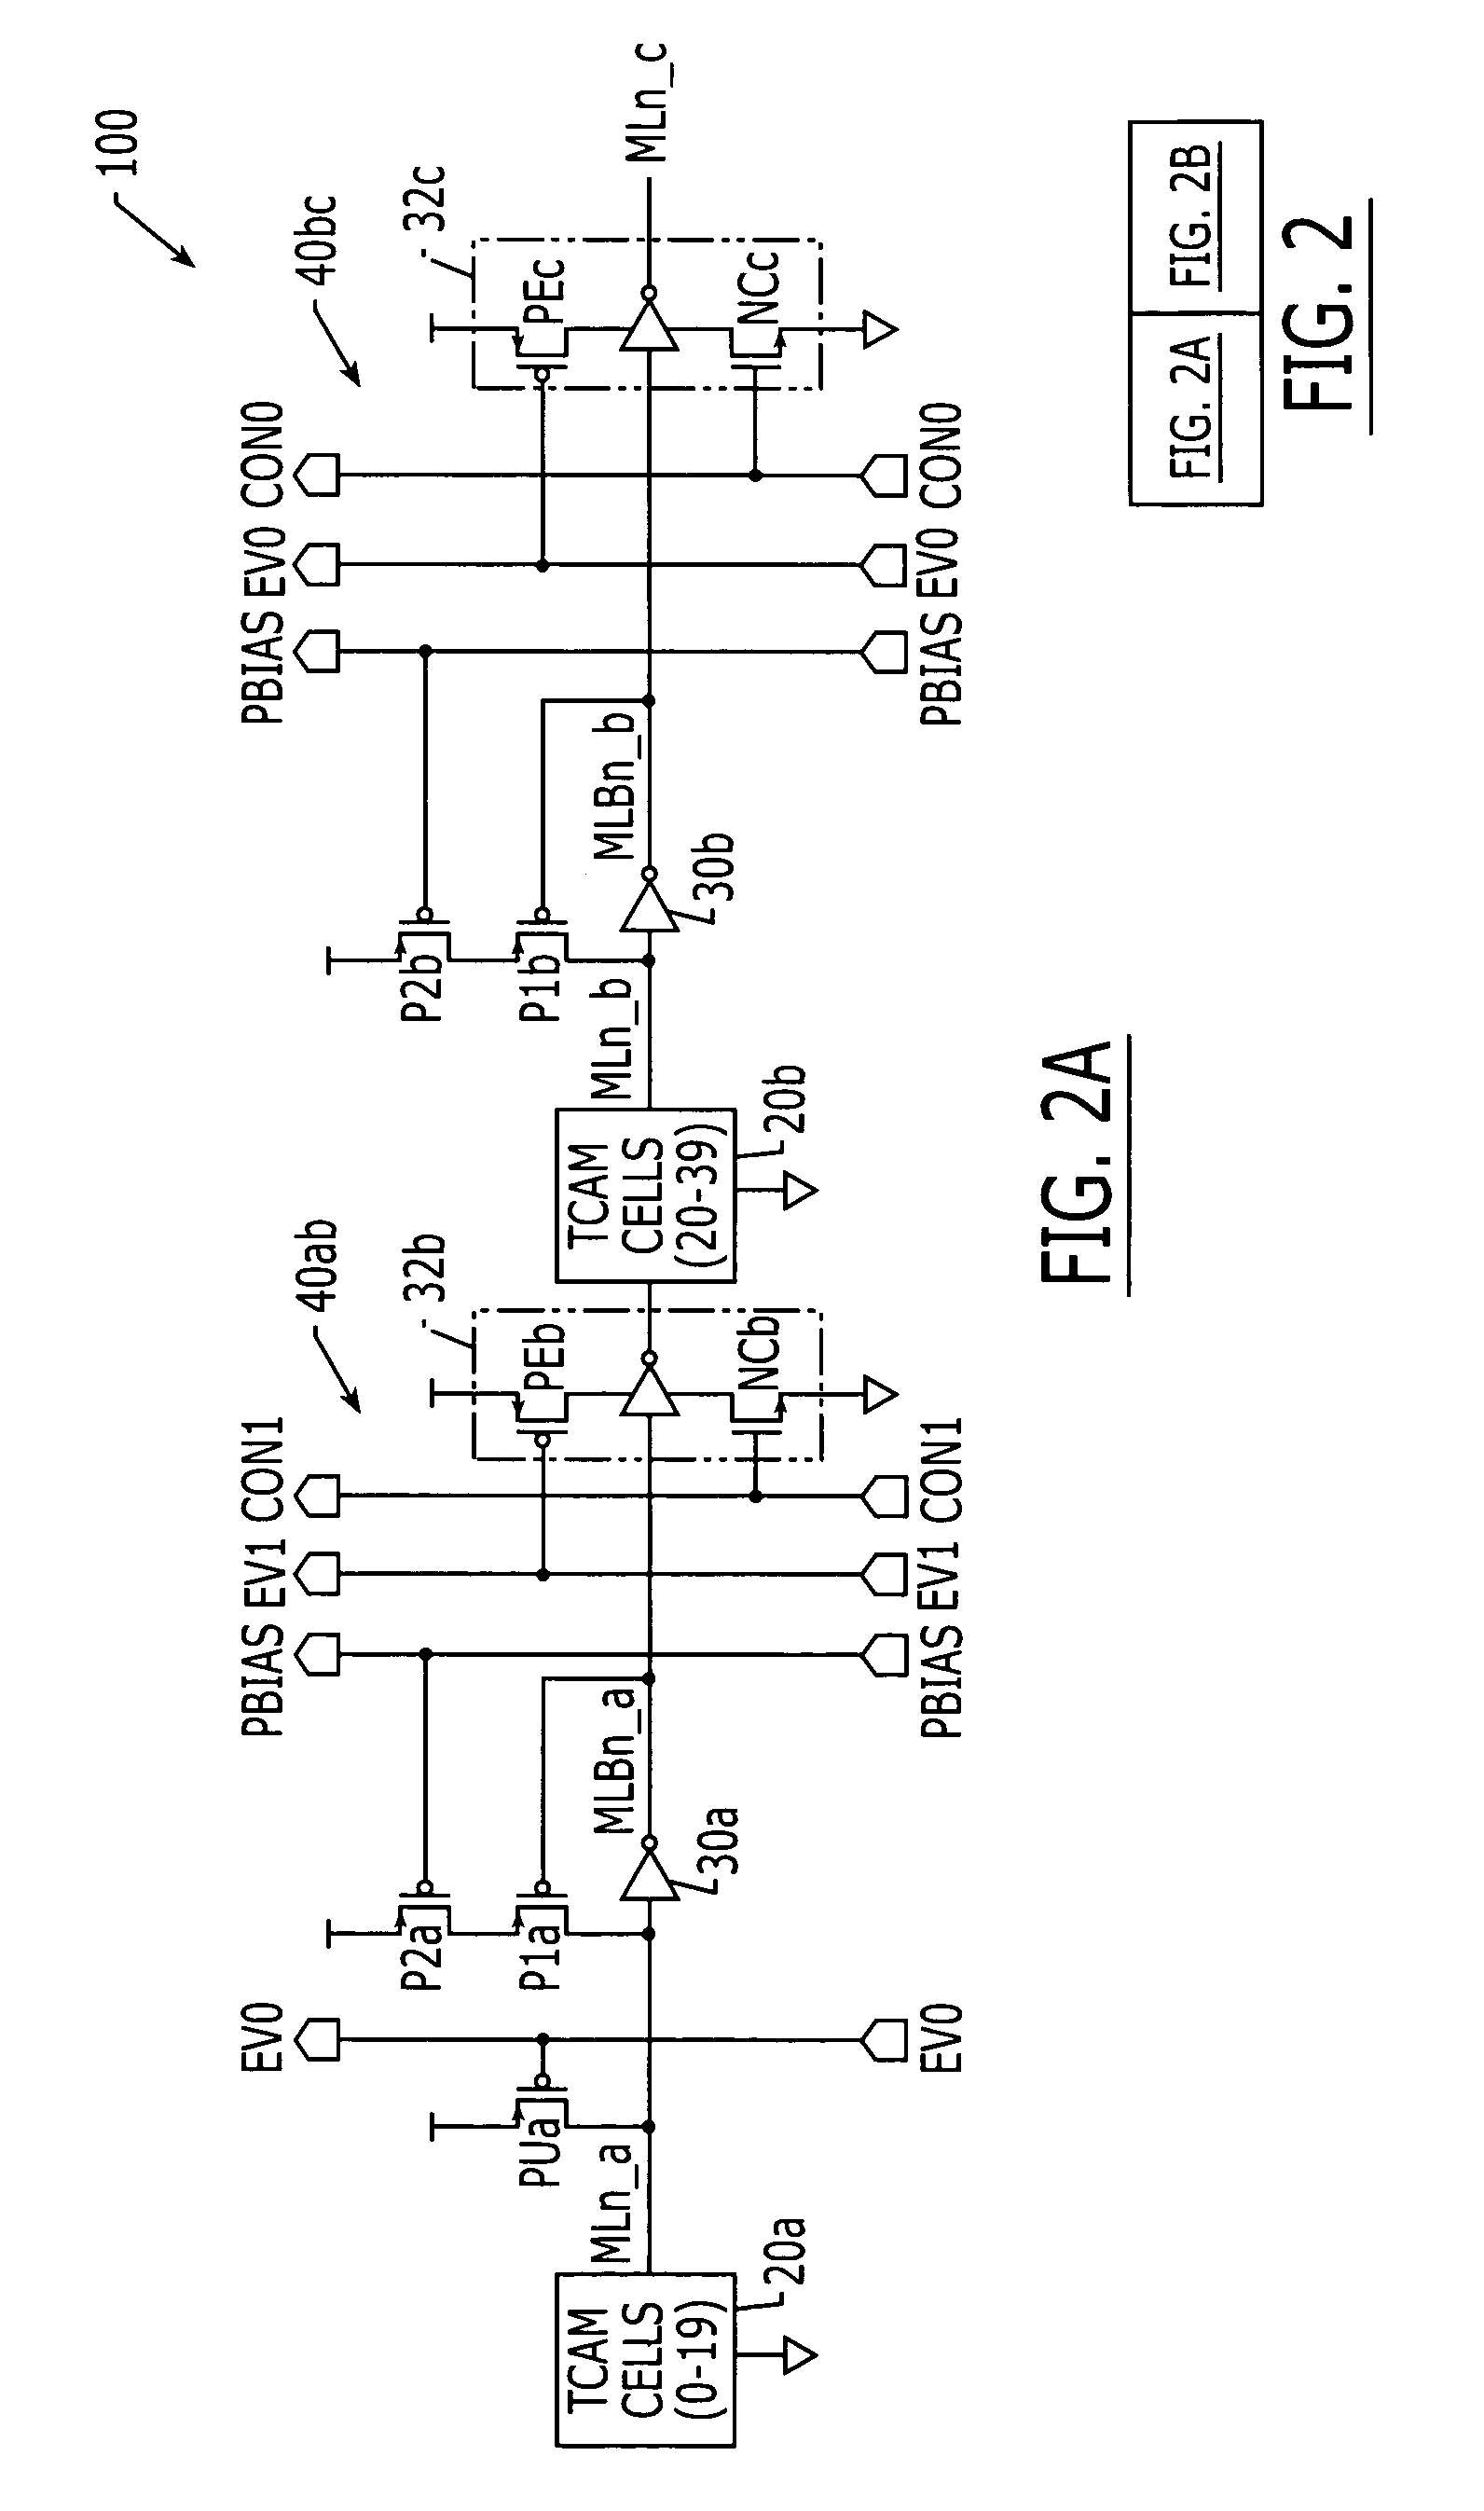 Content addressable memory (CAM) devices that utilize segmented match lines and word lines to support pipelined search and write operations and methods of operating same